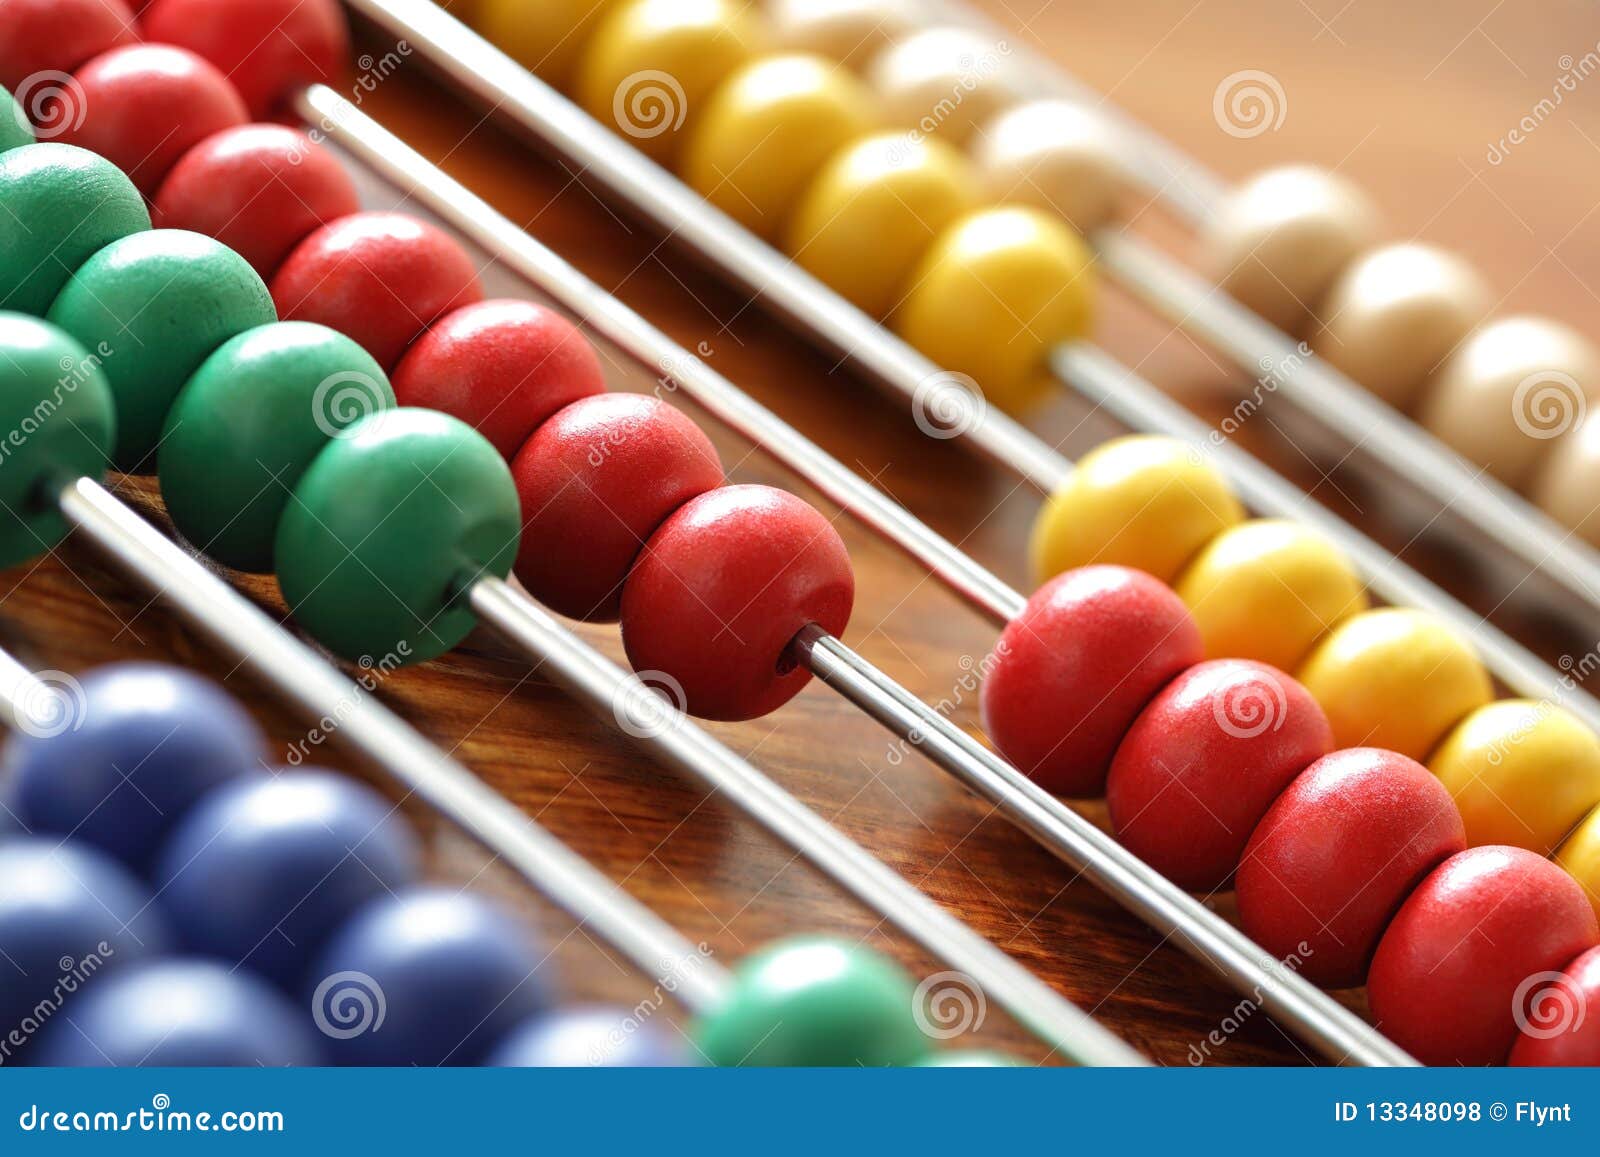 calculating on an abacus